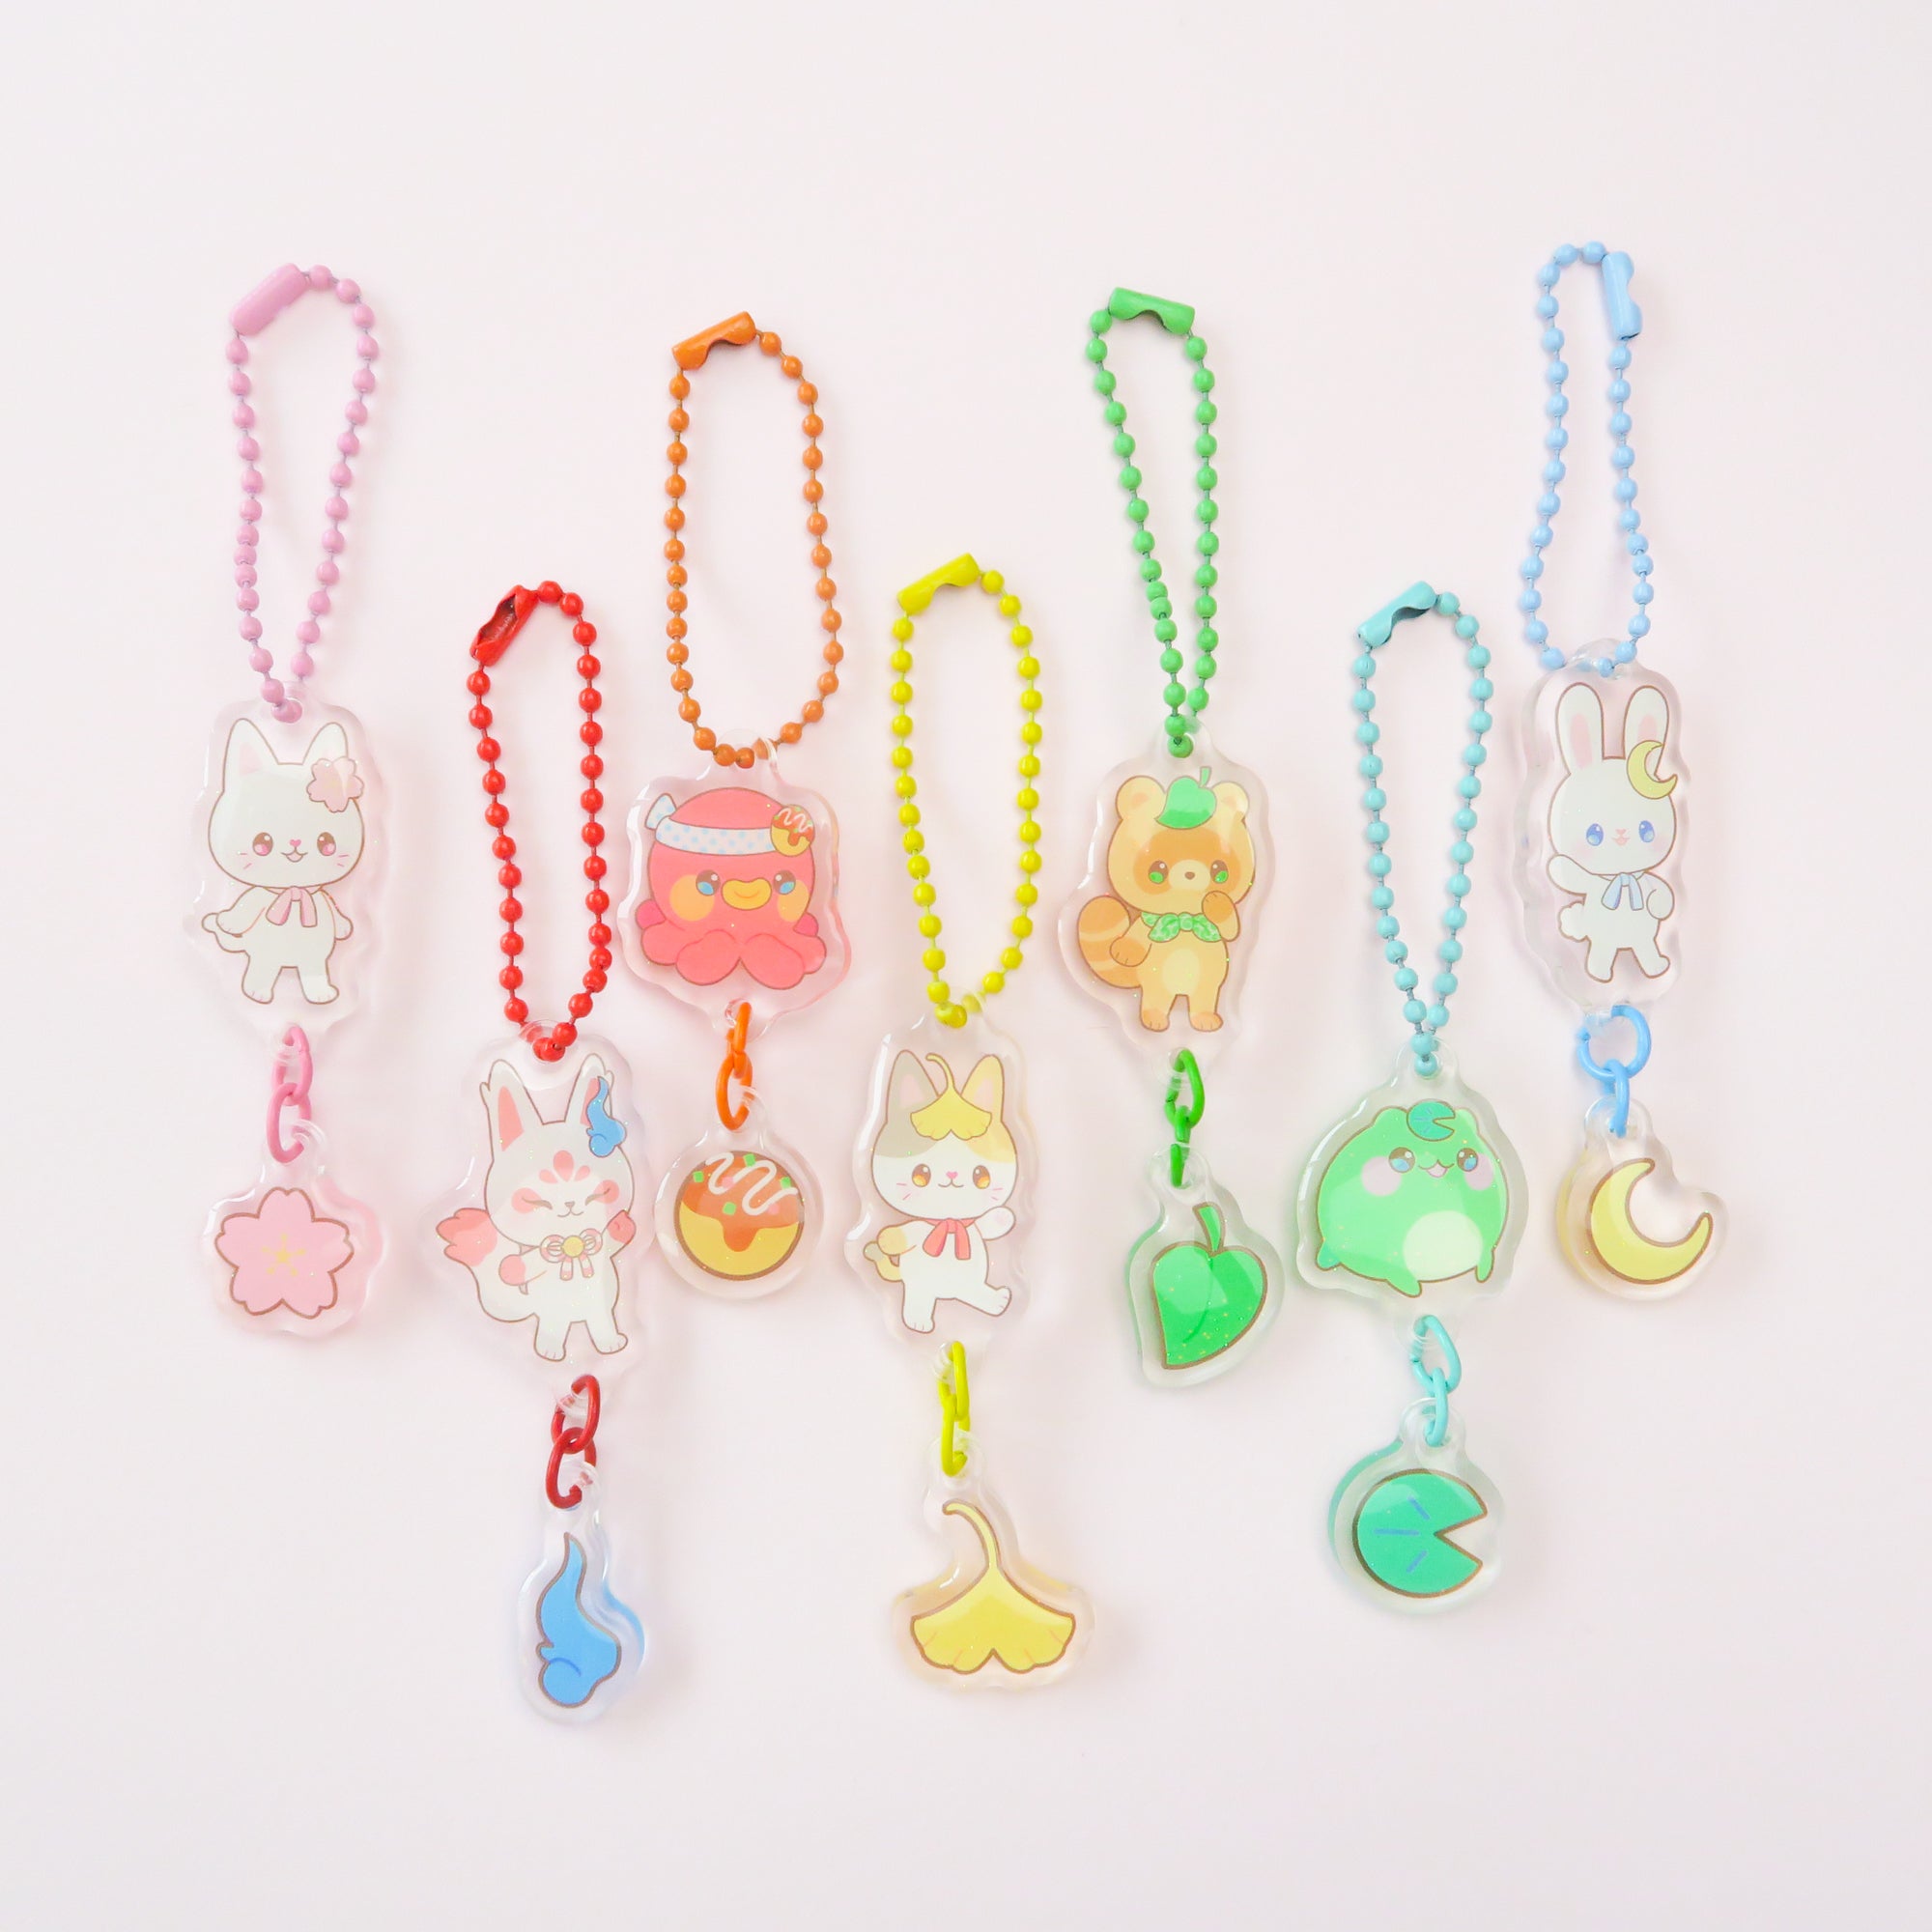 [Free for orders $50+ USD] Gacha Pon Keychain Surprise Bag